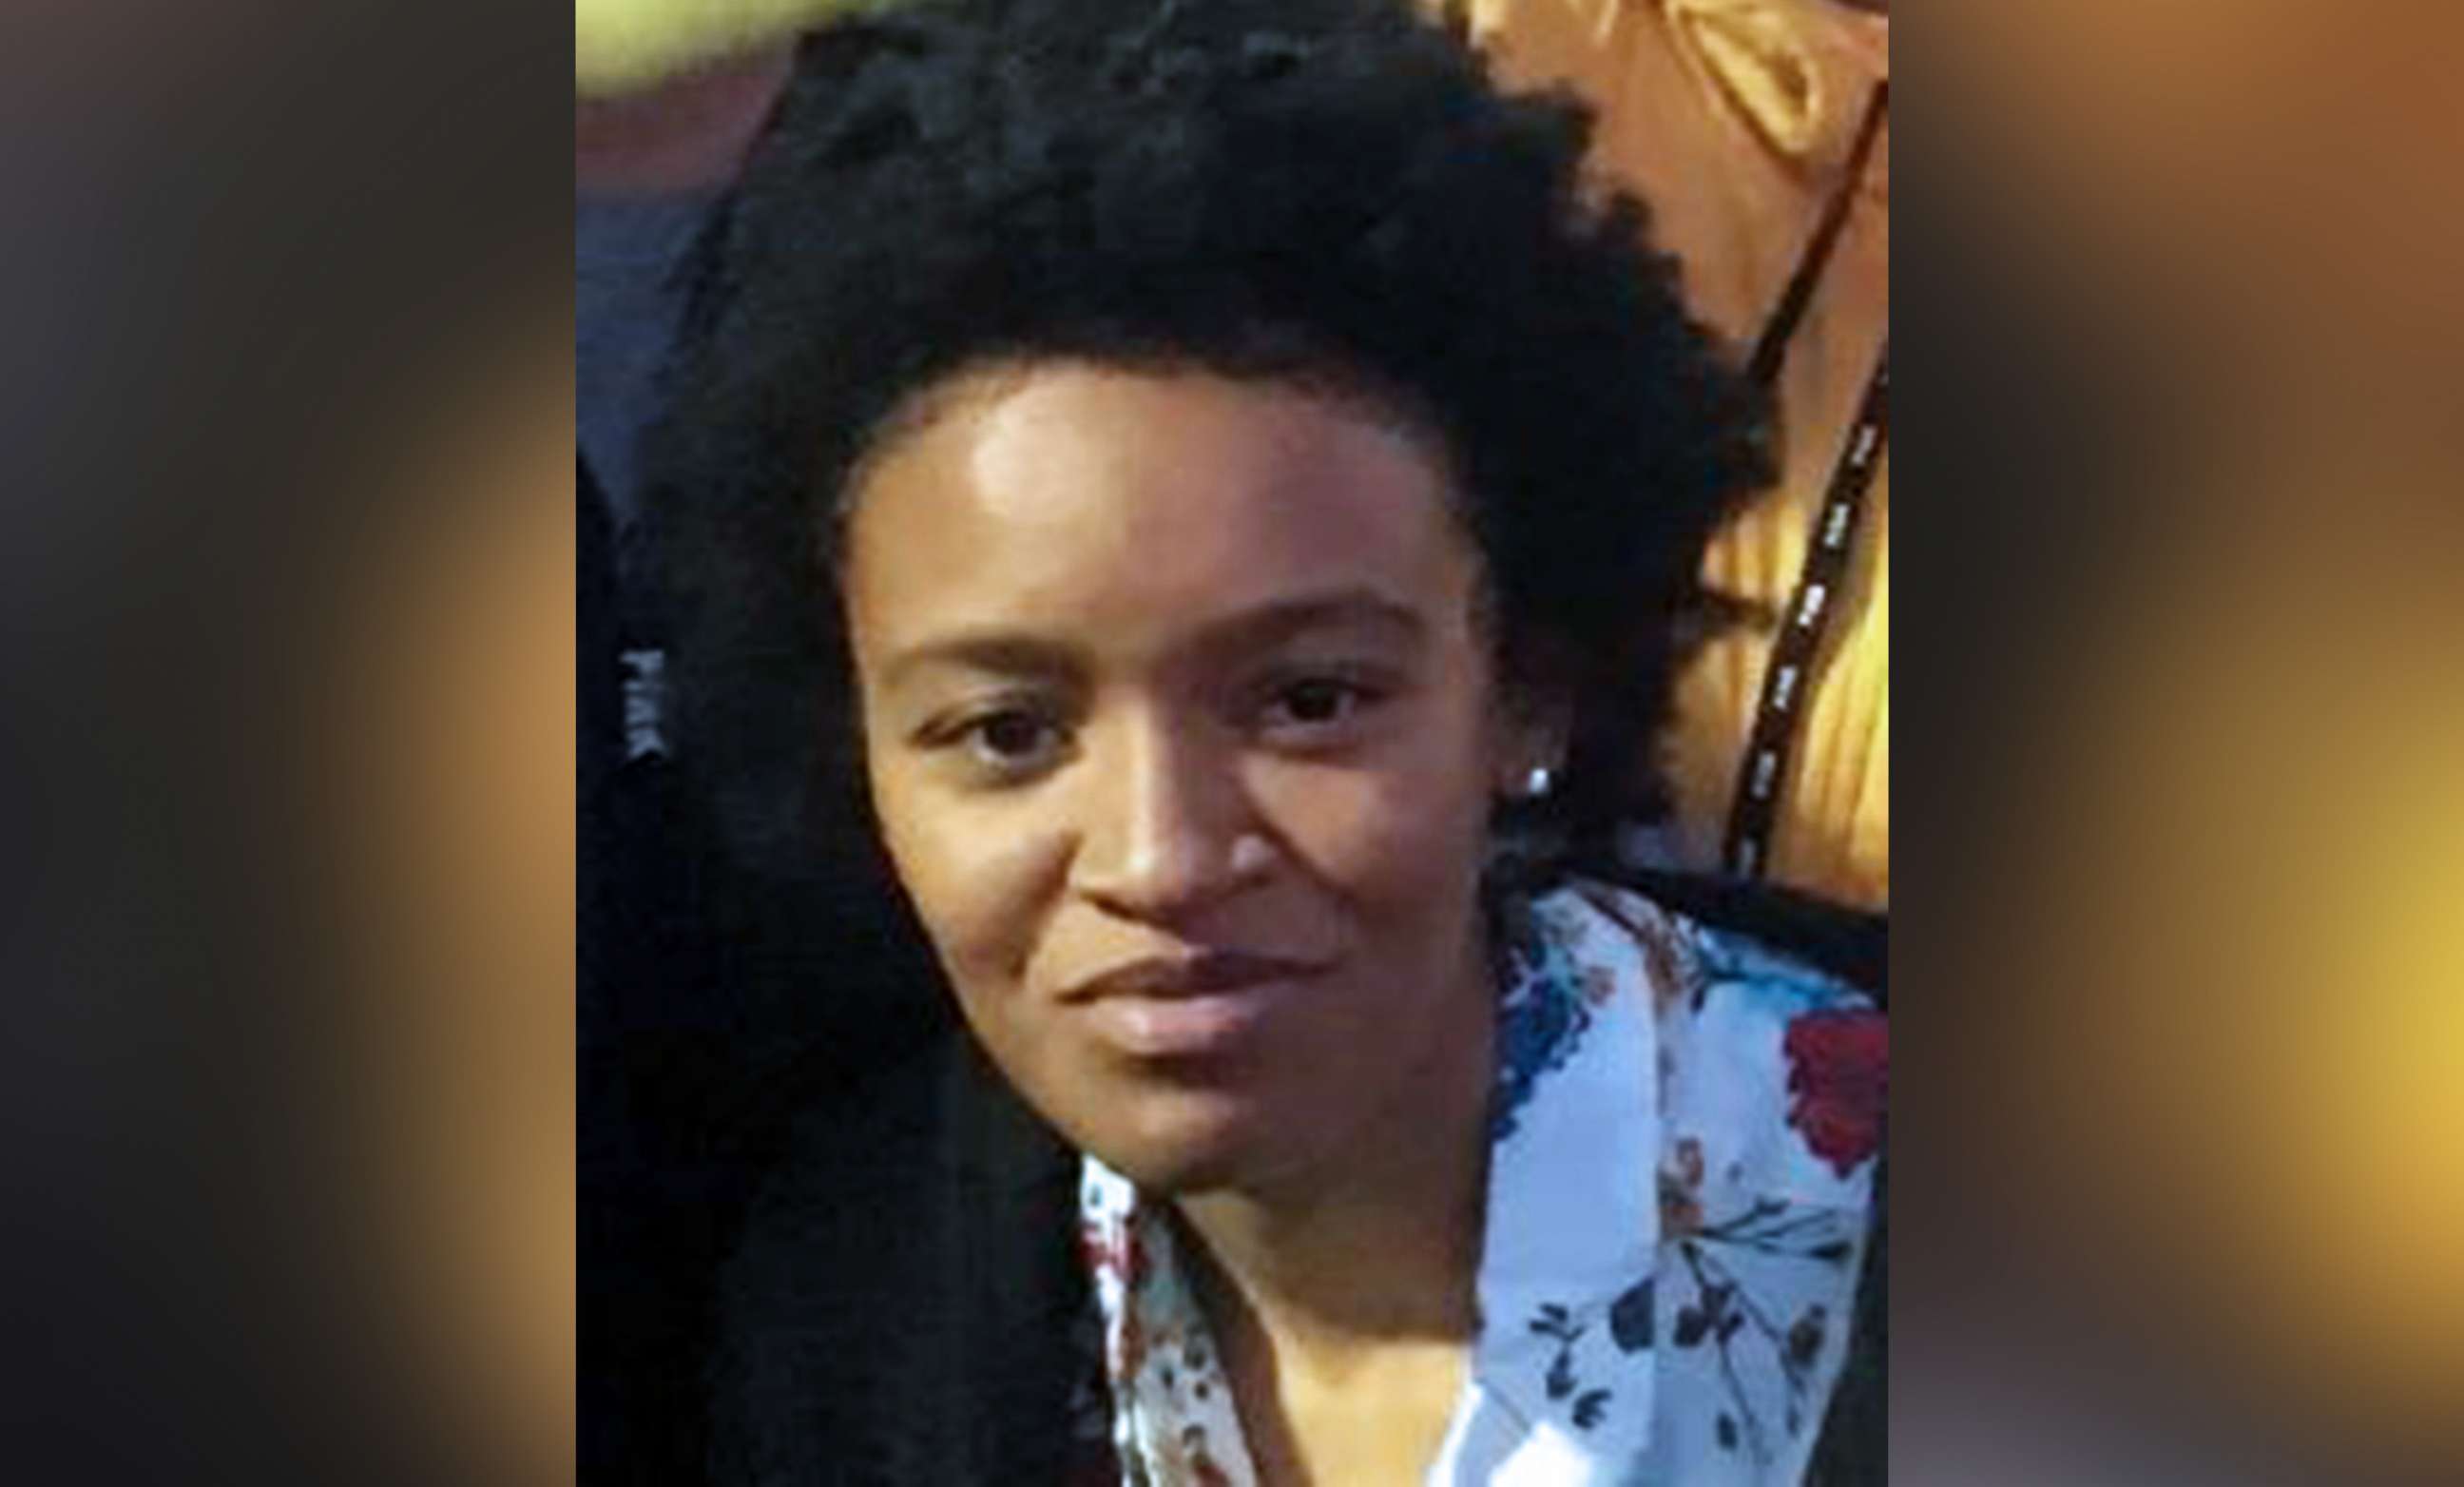 PHOTO: The Maui Police Department shared this undated image of Khiara Henry, 23, who was reported missing July 26, 2019, after the vehicle she'd rented in Maui was found abandoned in Waianapanapa State Park in Hana, Hawaii.